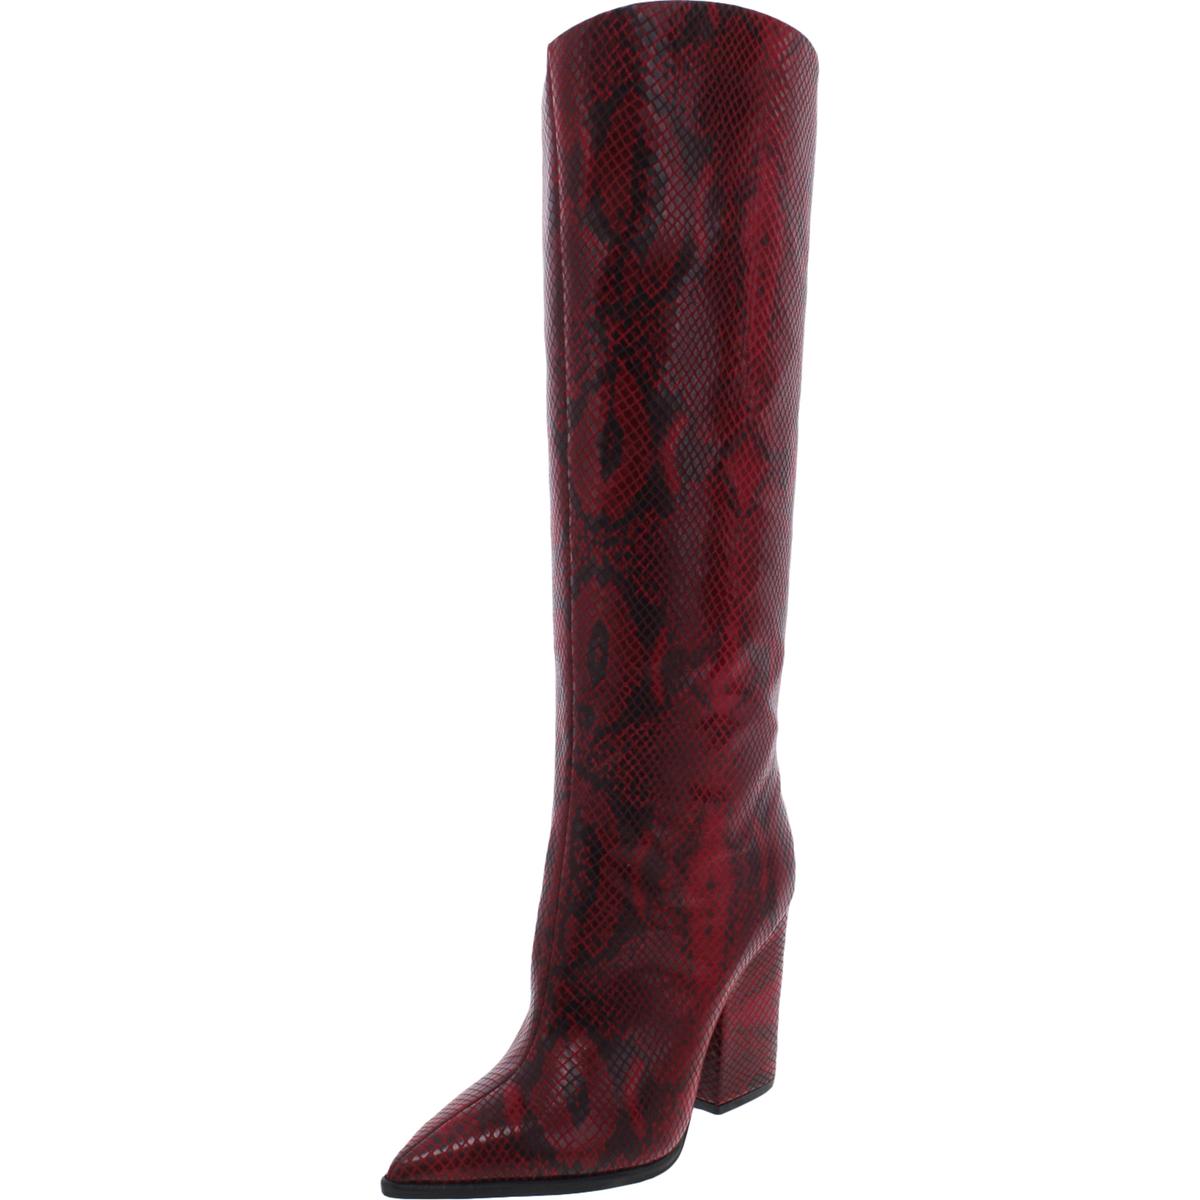 Vince Camuto Womens Elissan Snake Print Knee-High Boots Shoes BHFO 1737 |  eBay